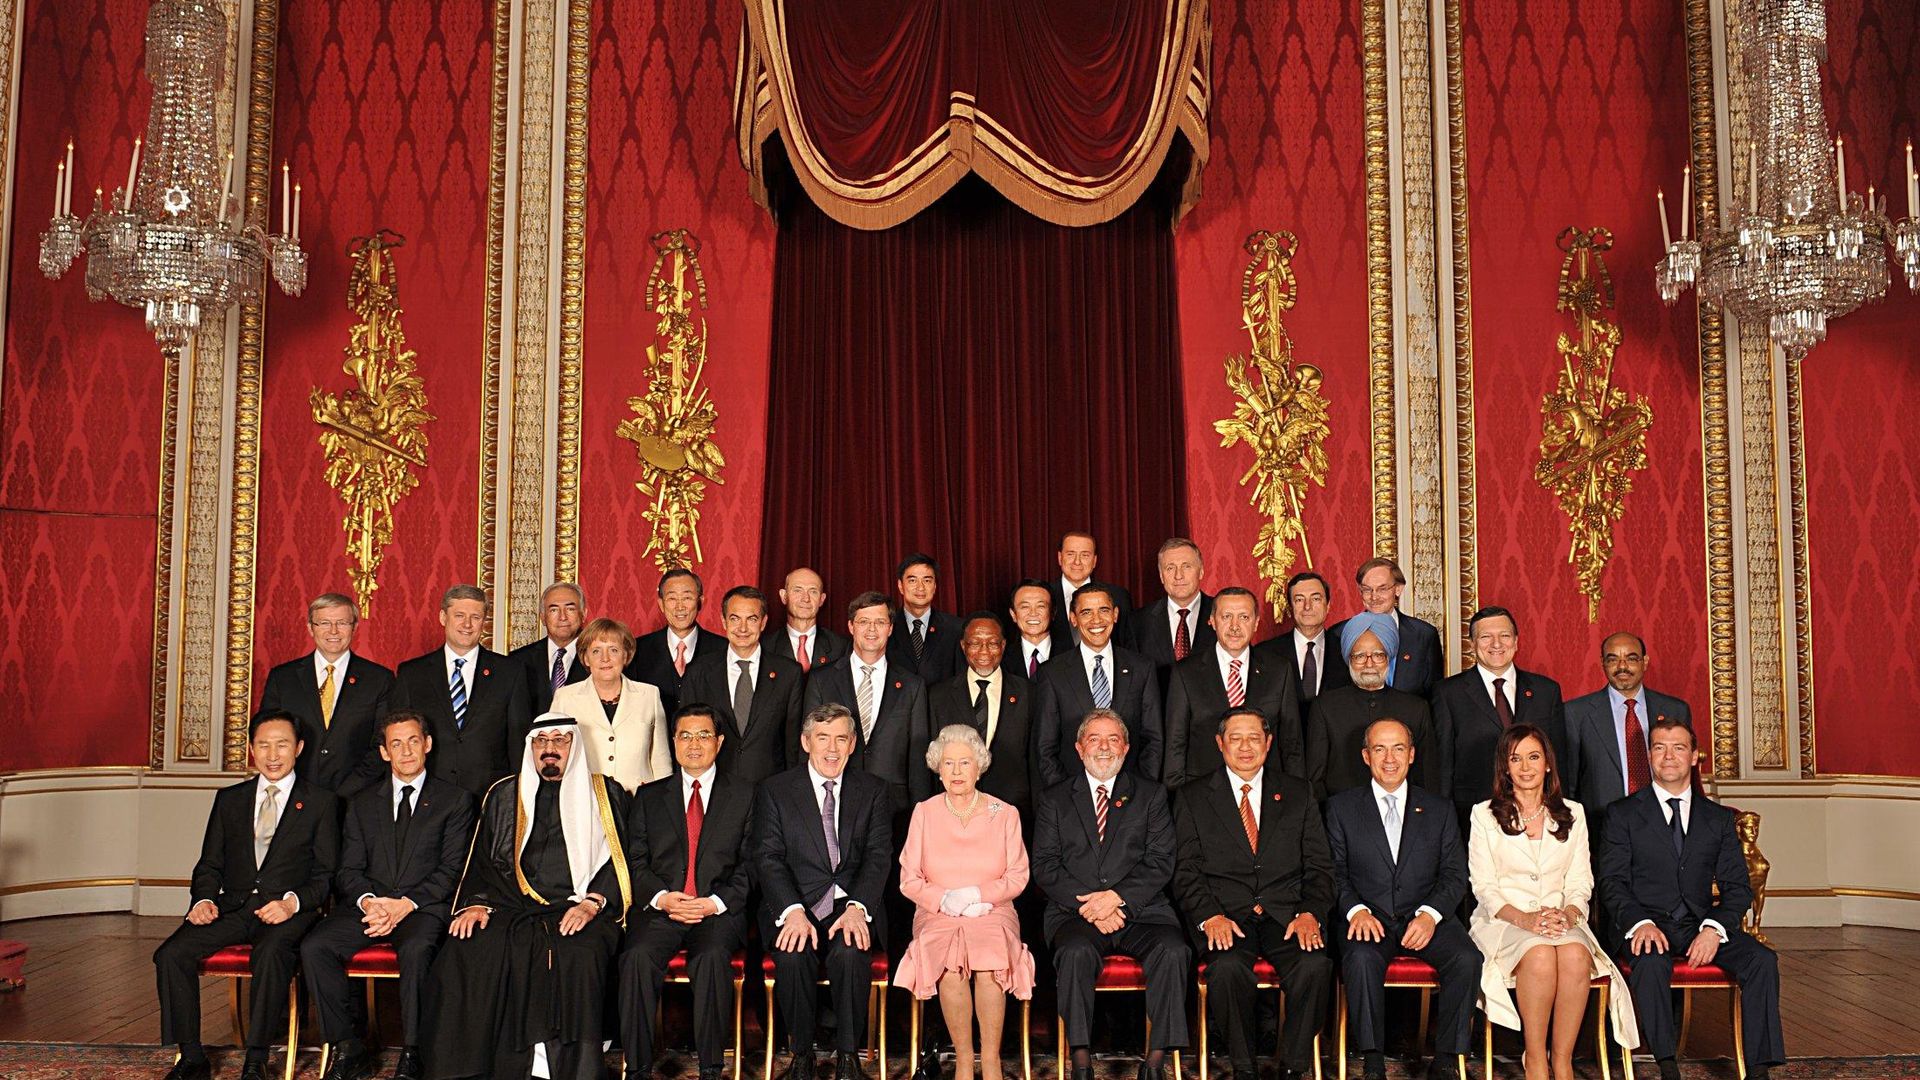 The Queen sat with heads of state inside the Throne Room